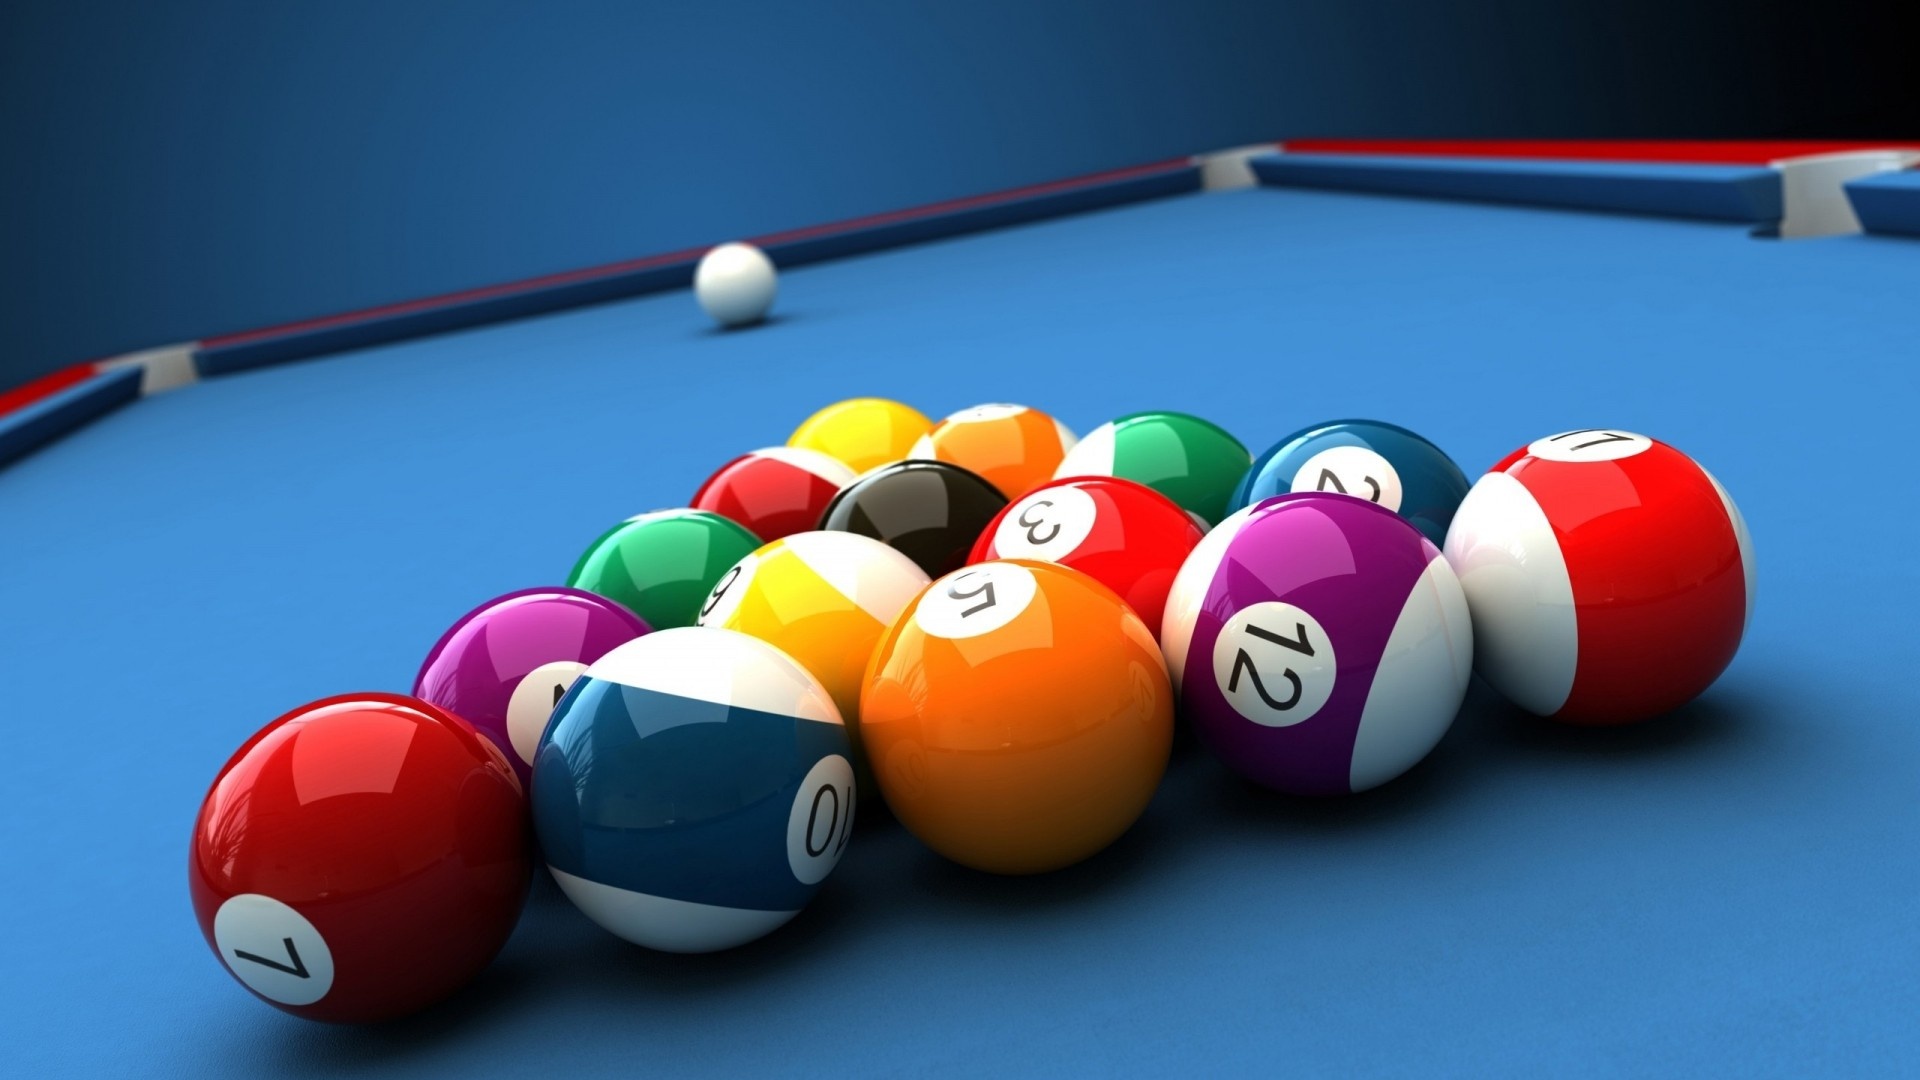 Pool (Cue Sports): An eight-ball billiard table covered with a blue cloth called baize, with six pockets for fifteen object balls. 1920x1080 Full HD Background.